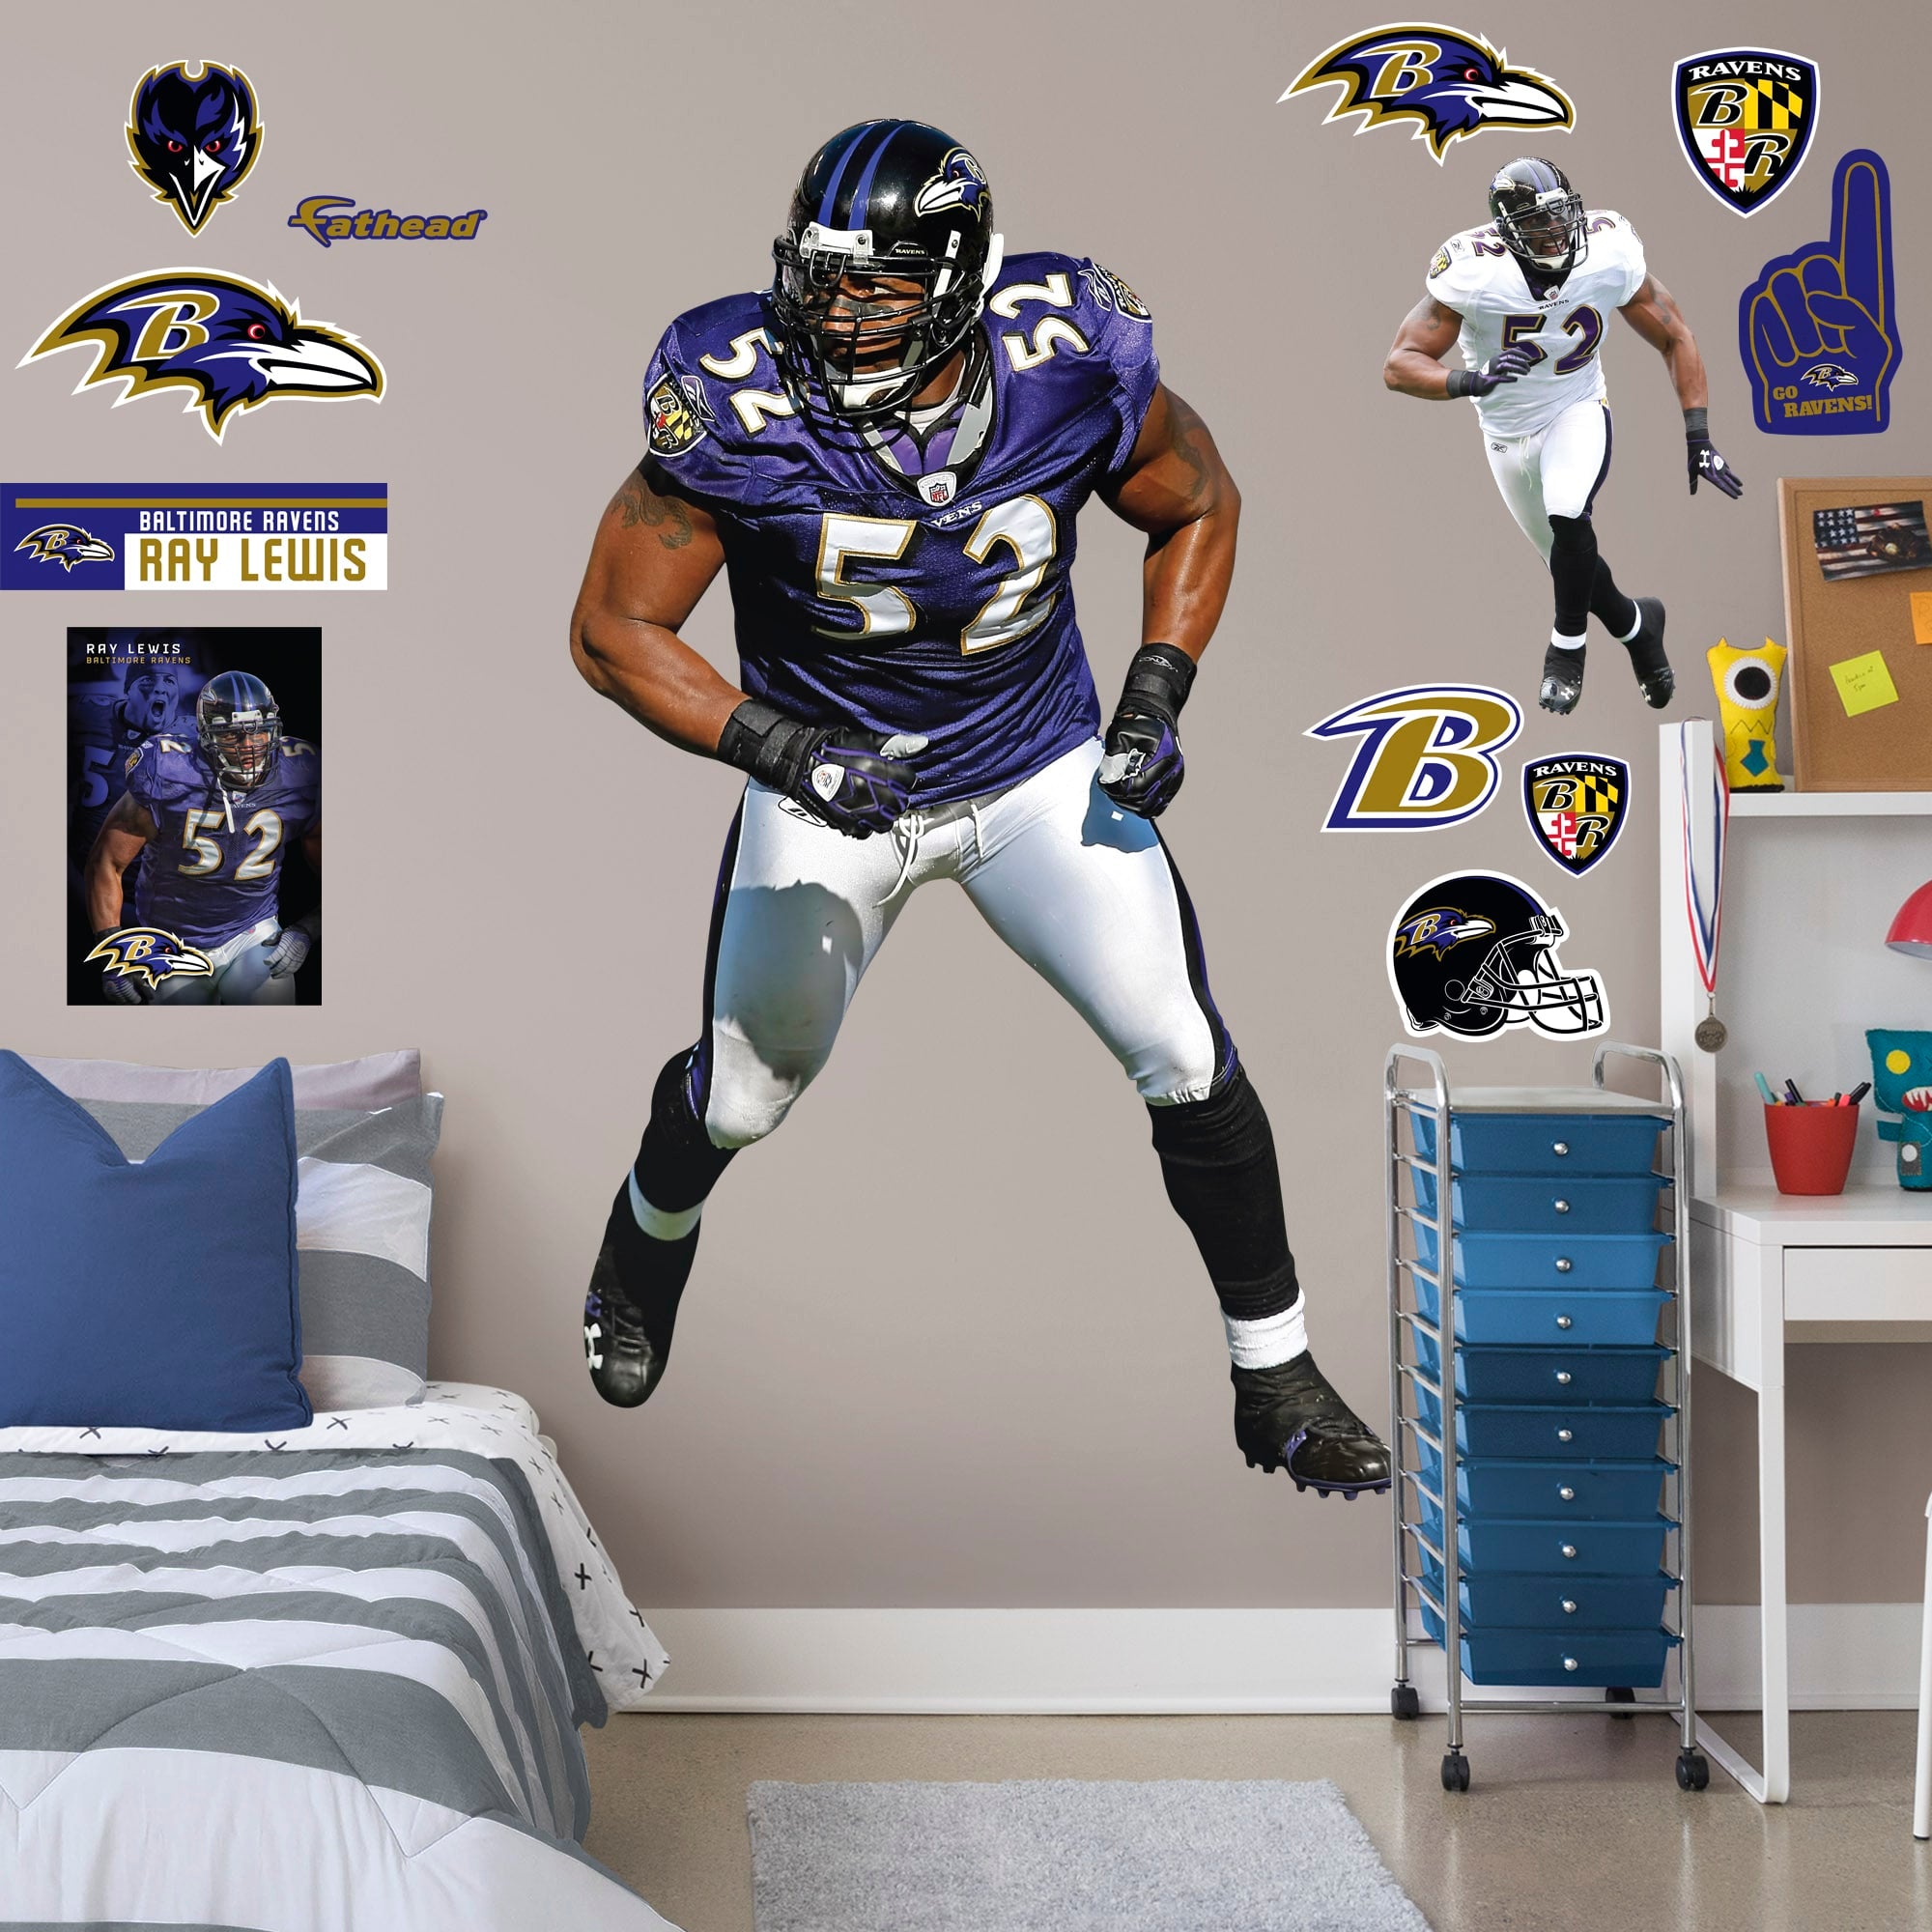 Ray Lewis for Baltimore Ravens: Legend - Officially Licensed NFL Removable Wall Decal Life-Size Athlete + 12 Decals (47"W x 78"H